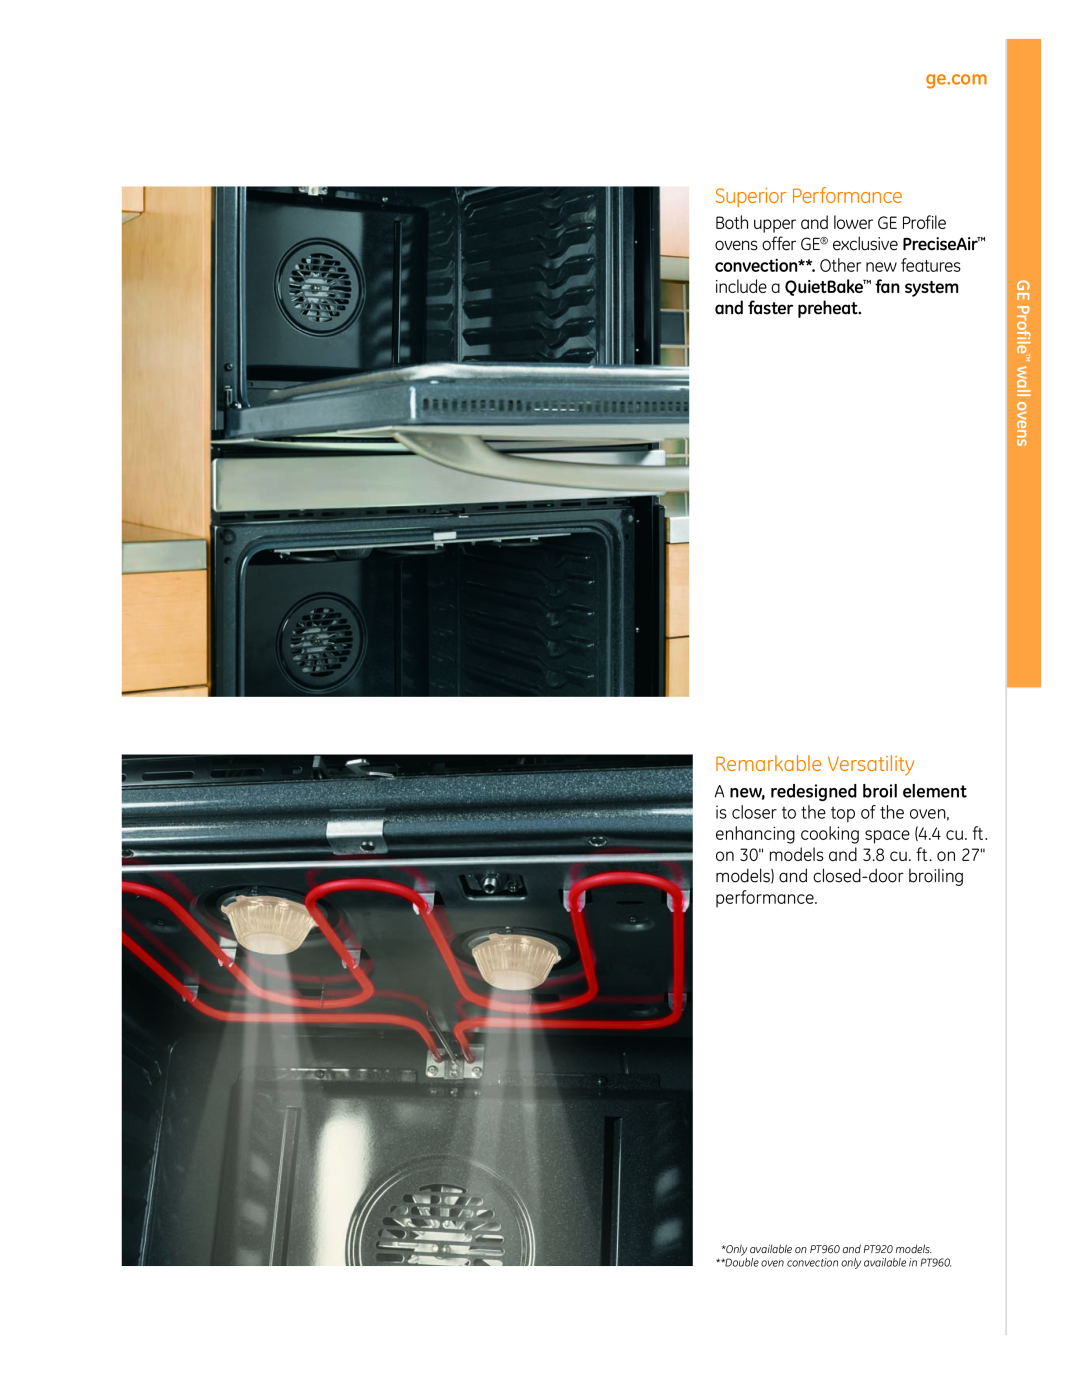 GE PT920, PT960 manual Superior Performance, Remarkable Versatility, include a QuietBake fan system and faster preheat 